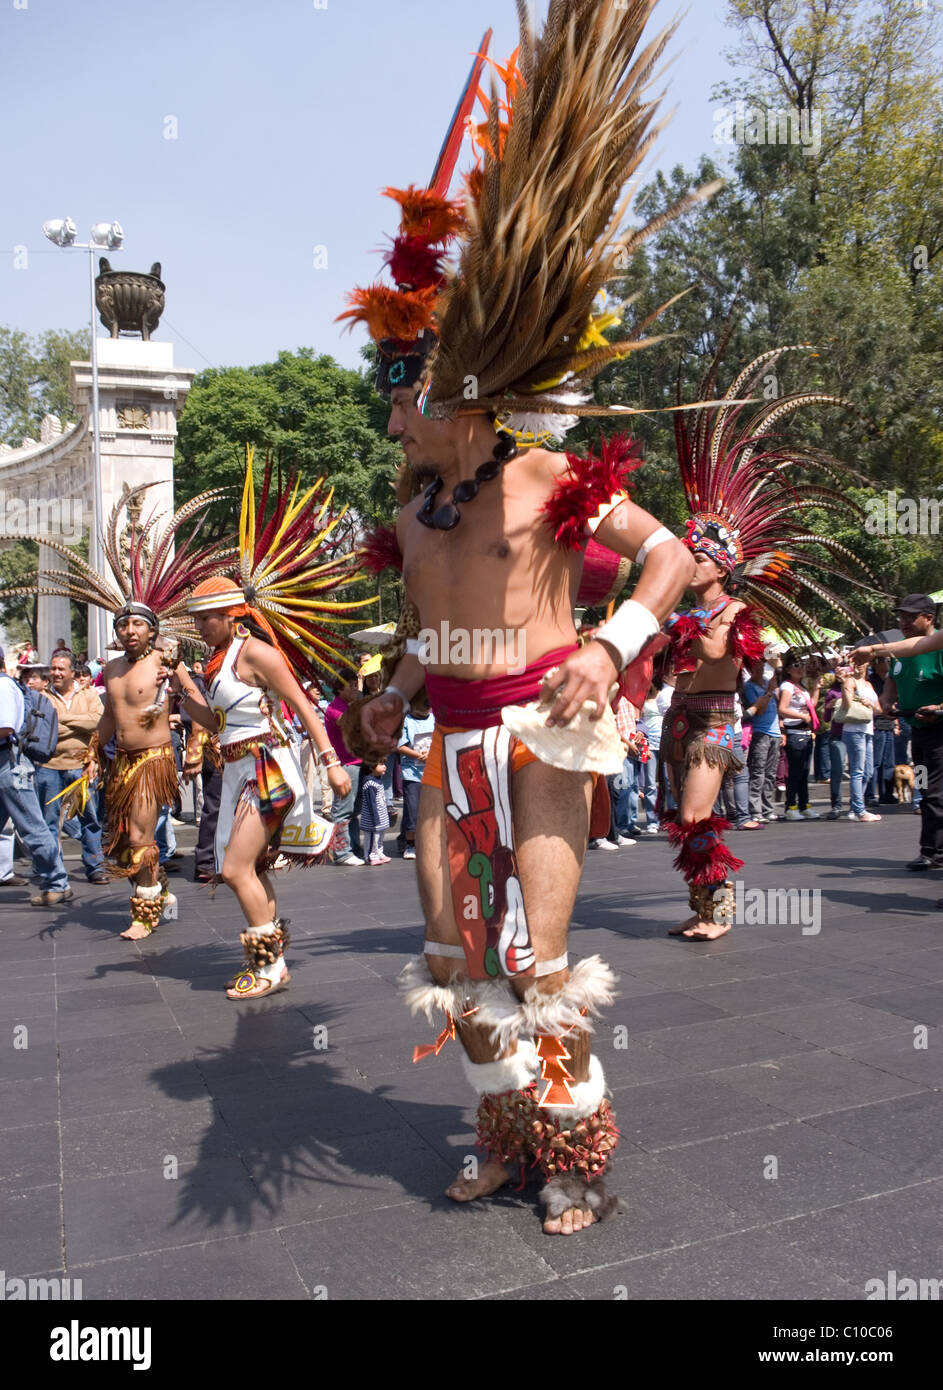 Prehispanic (Aztec) dance group performing during a parade in Mexico city Stock Photo